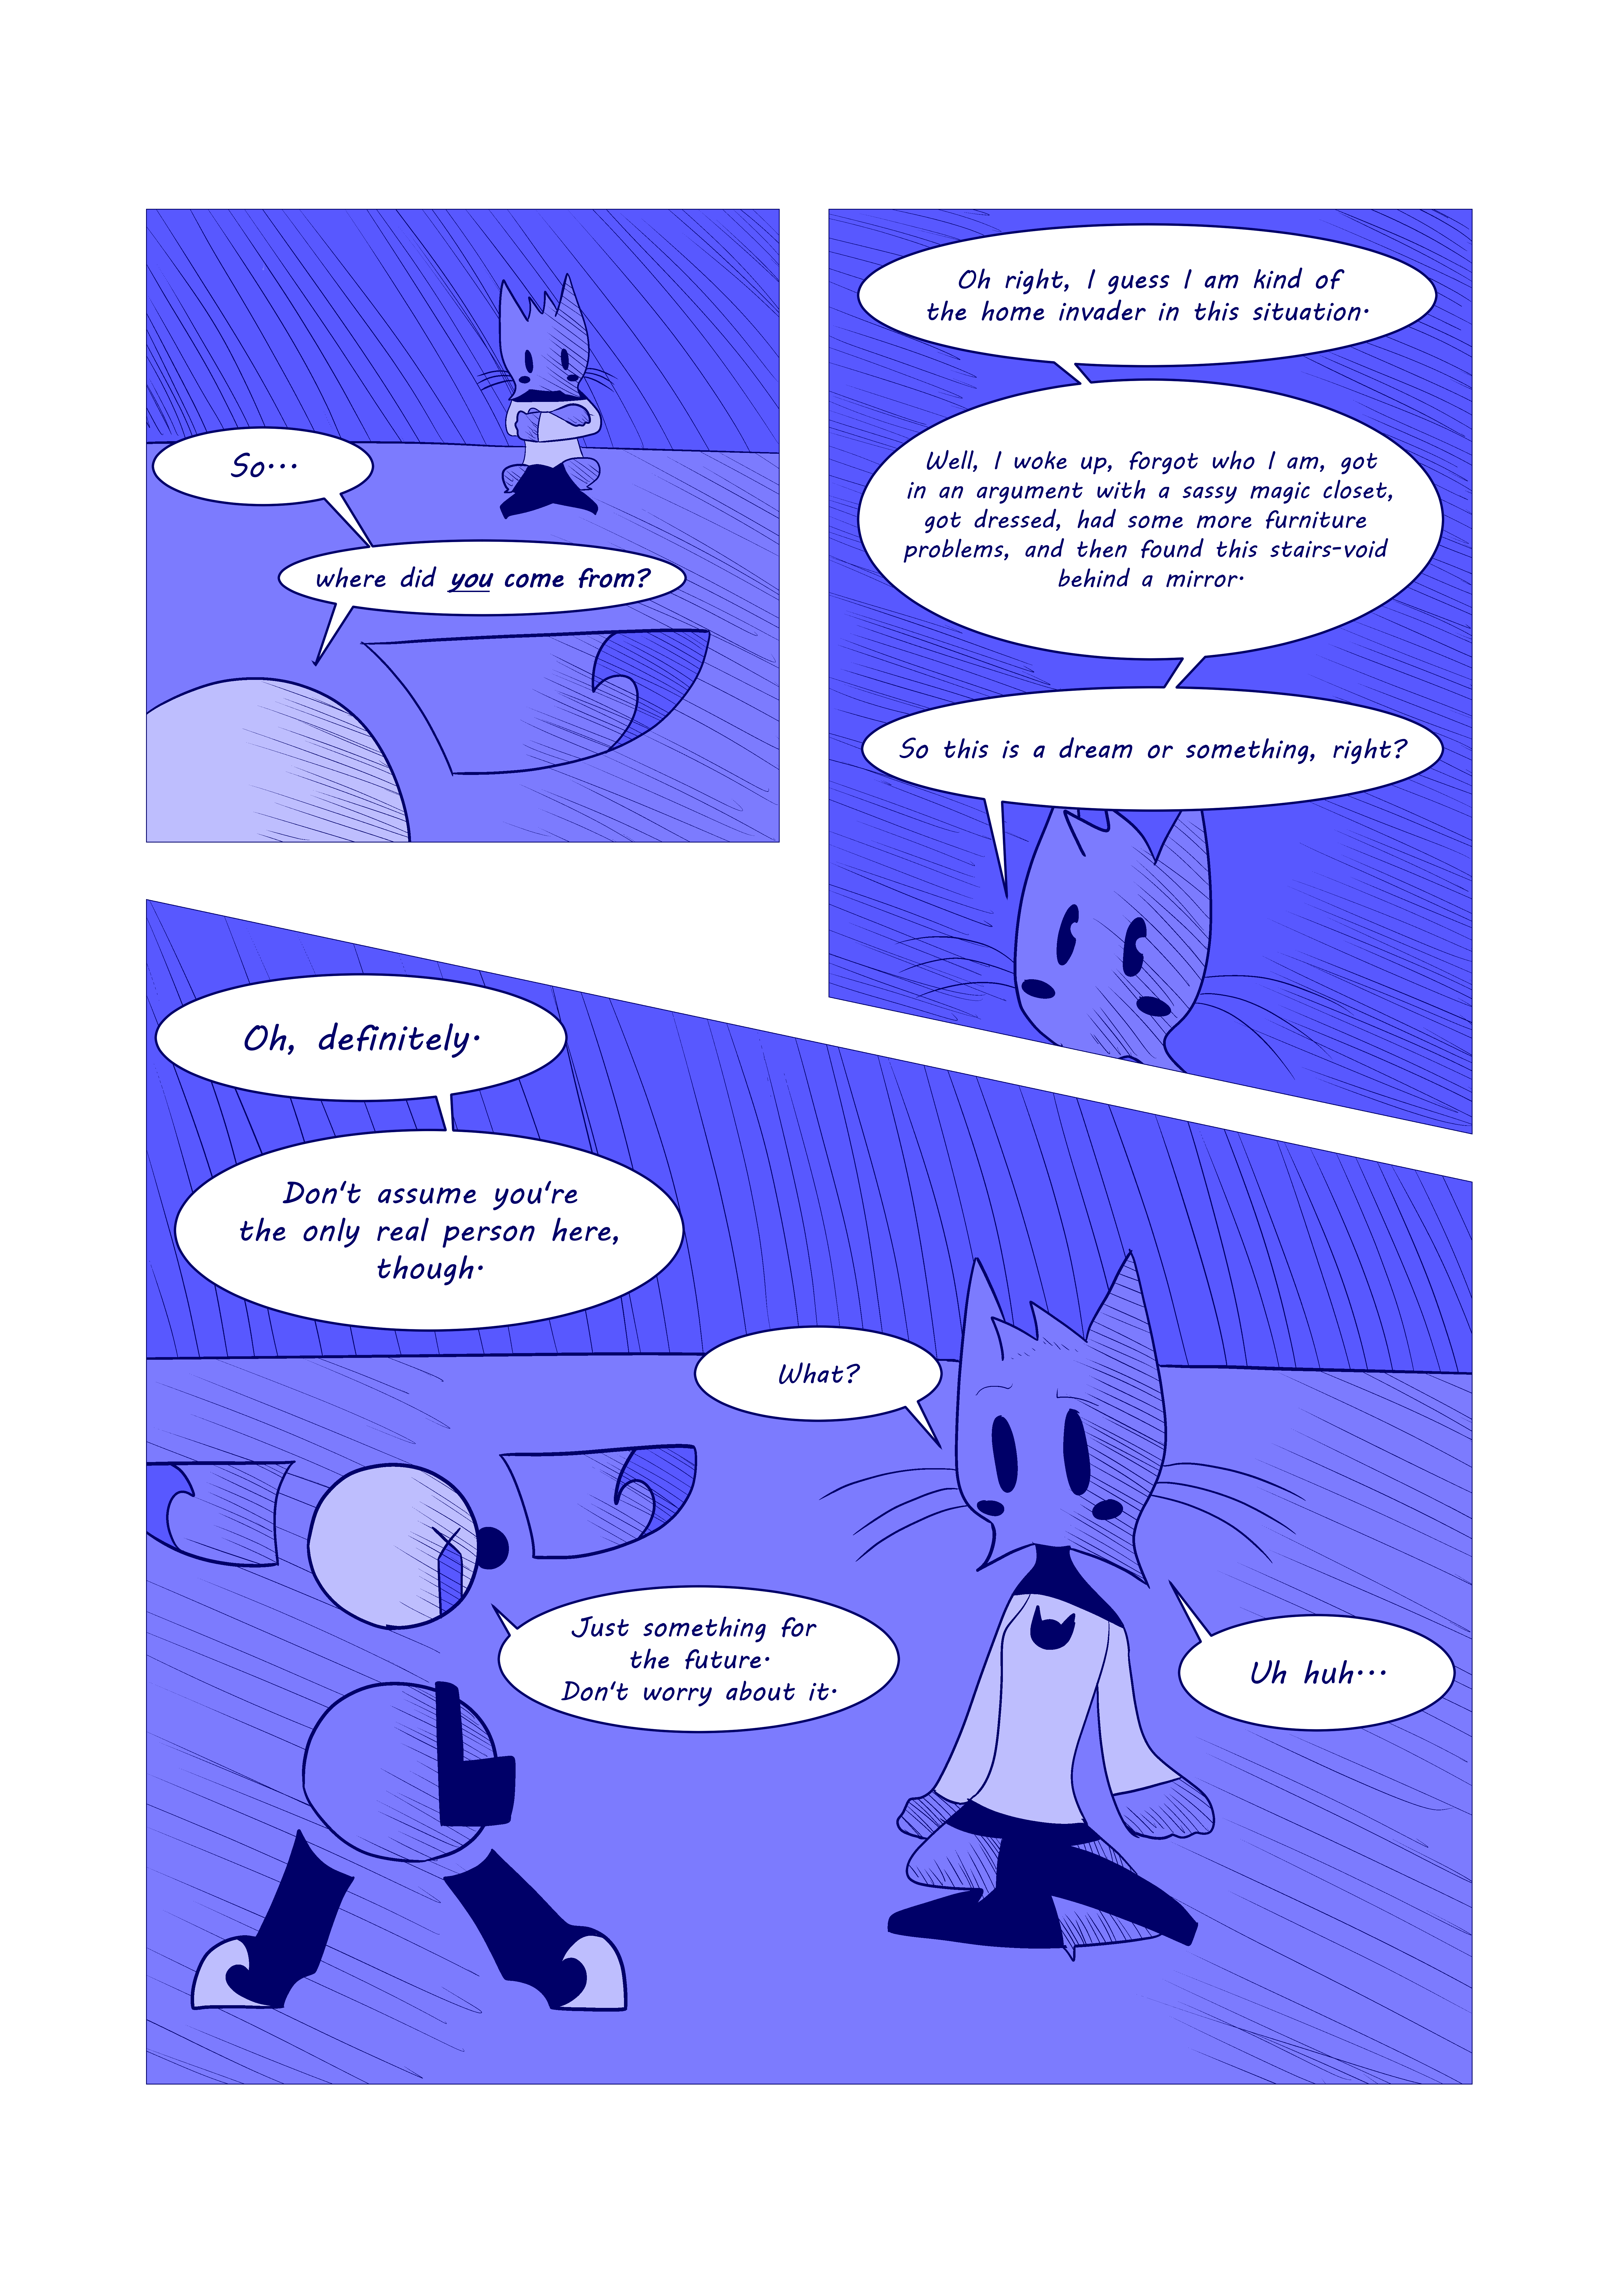 IaaDiTe Page 16: Still don't worry about it